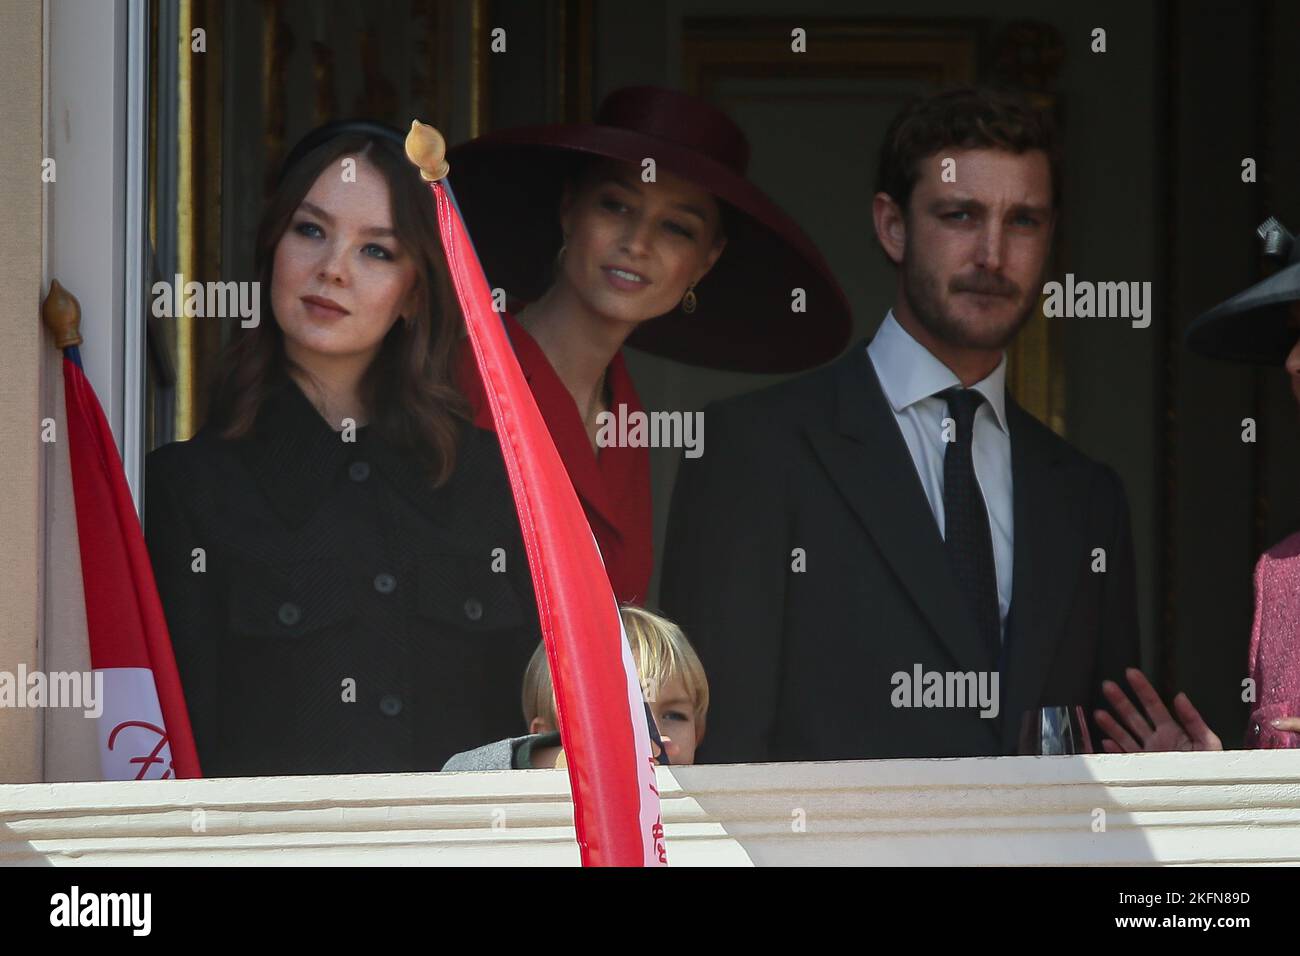 Pierre Casiraghi, Princess Alexandra of Hanover, Beatrice Borromeo, Stefano Casiraghi are attending the parade at the palace balcony during the celebration for the National Day on November 19, 2022 in Monaco Ville, Principality of Monaco. Photo by Marco Piovanotto/IPA - NO TABLOIDS Stock Photo